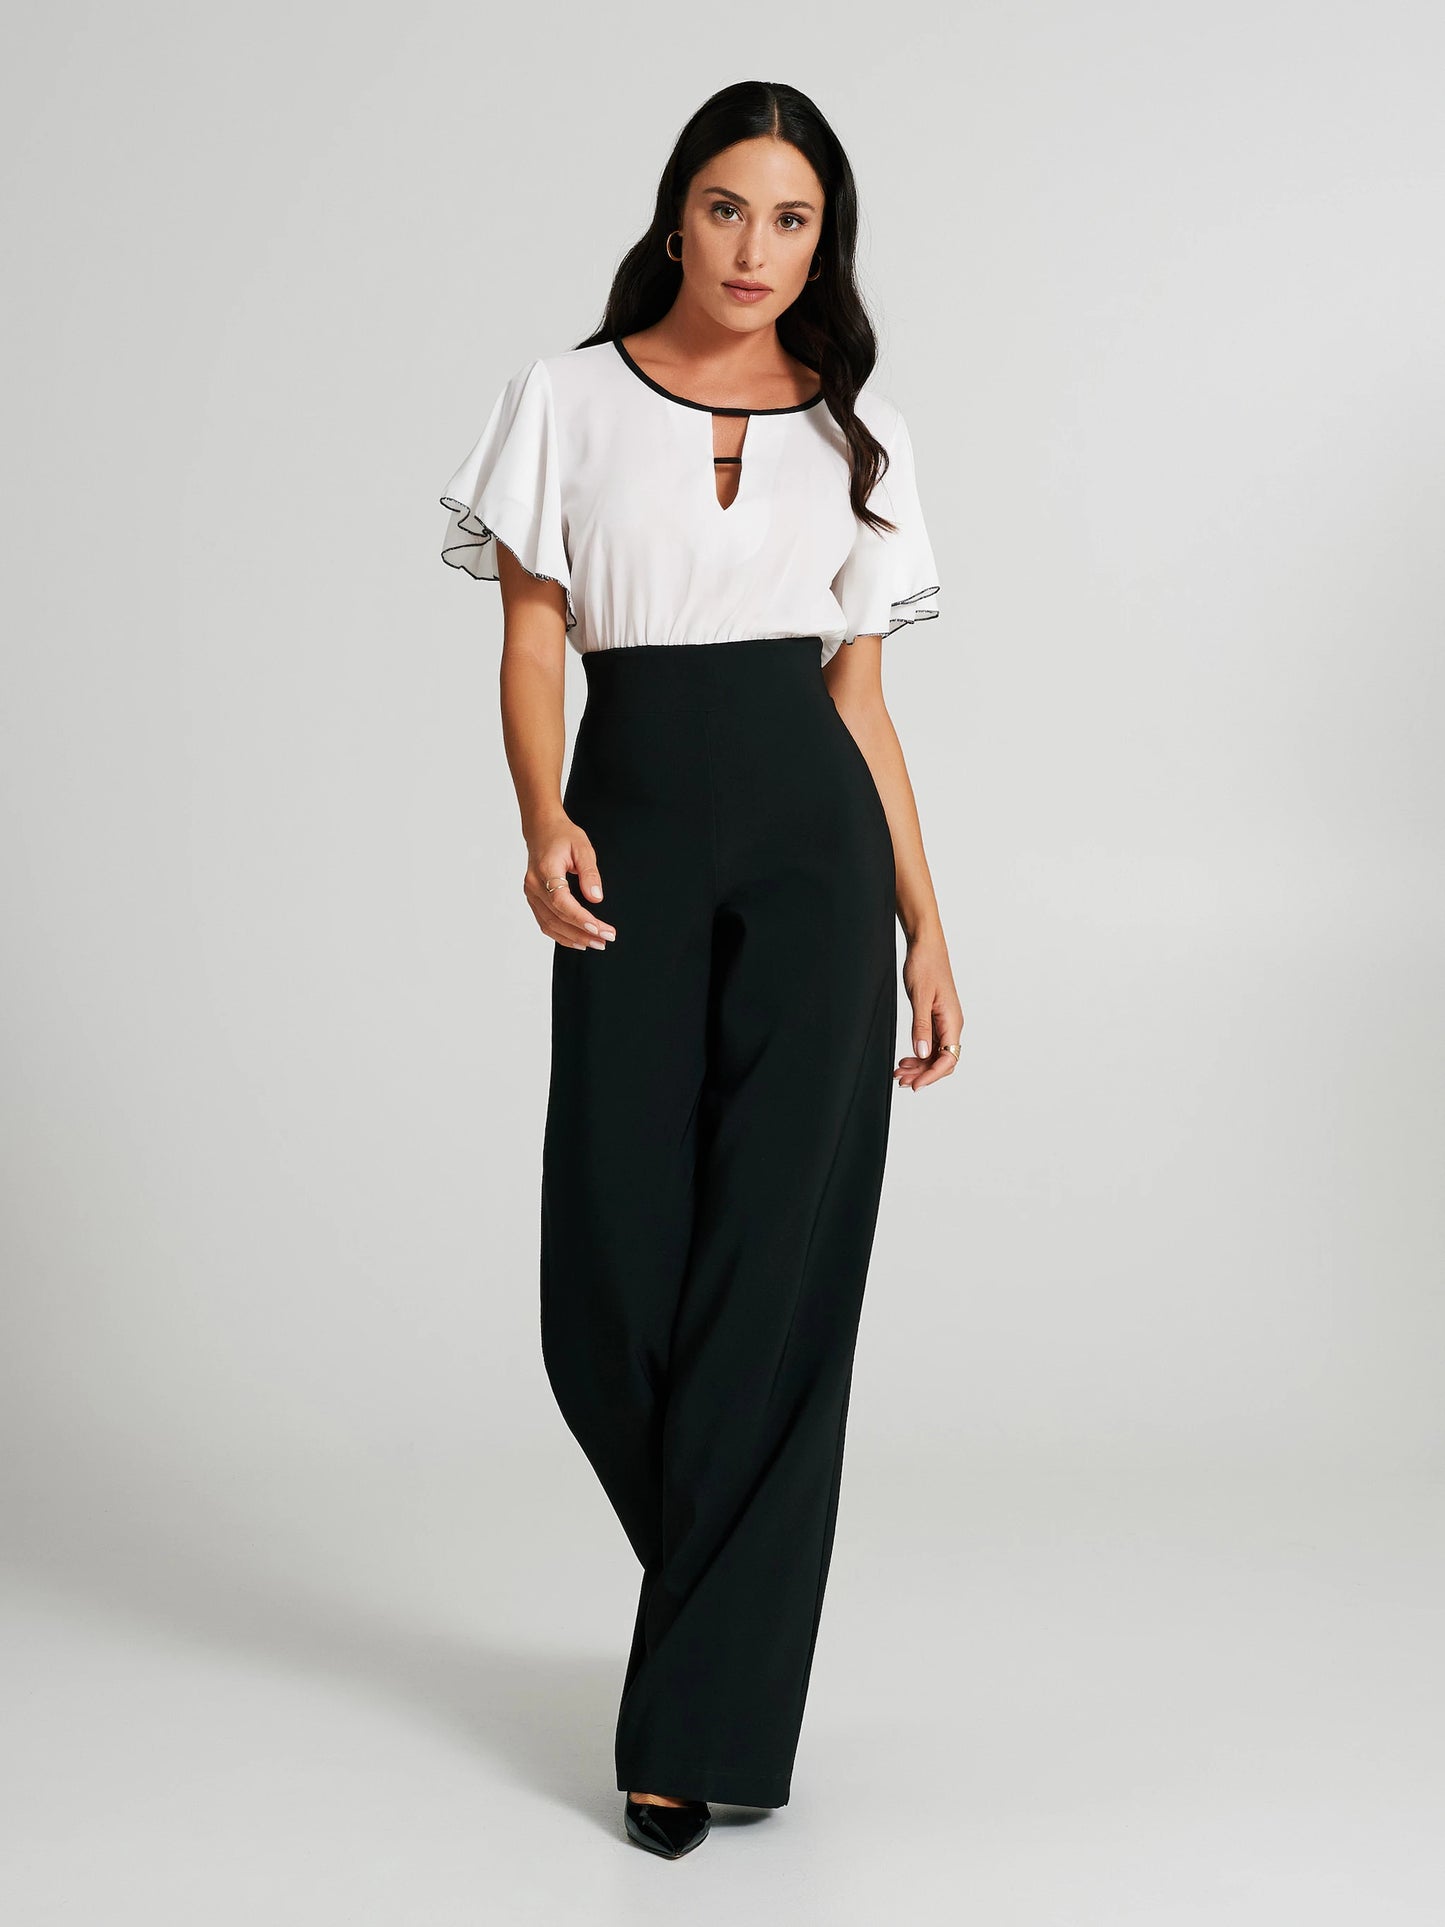 Two-toned palazzo jumpsuit